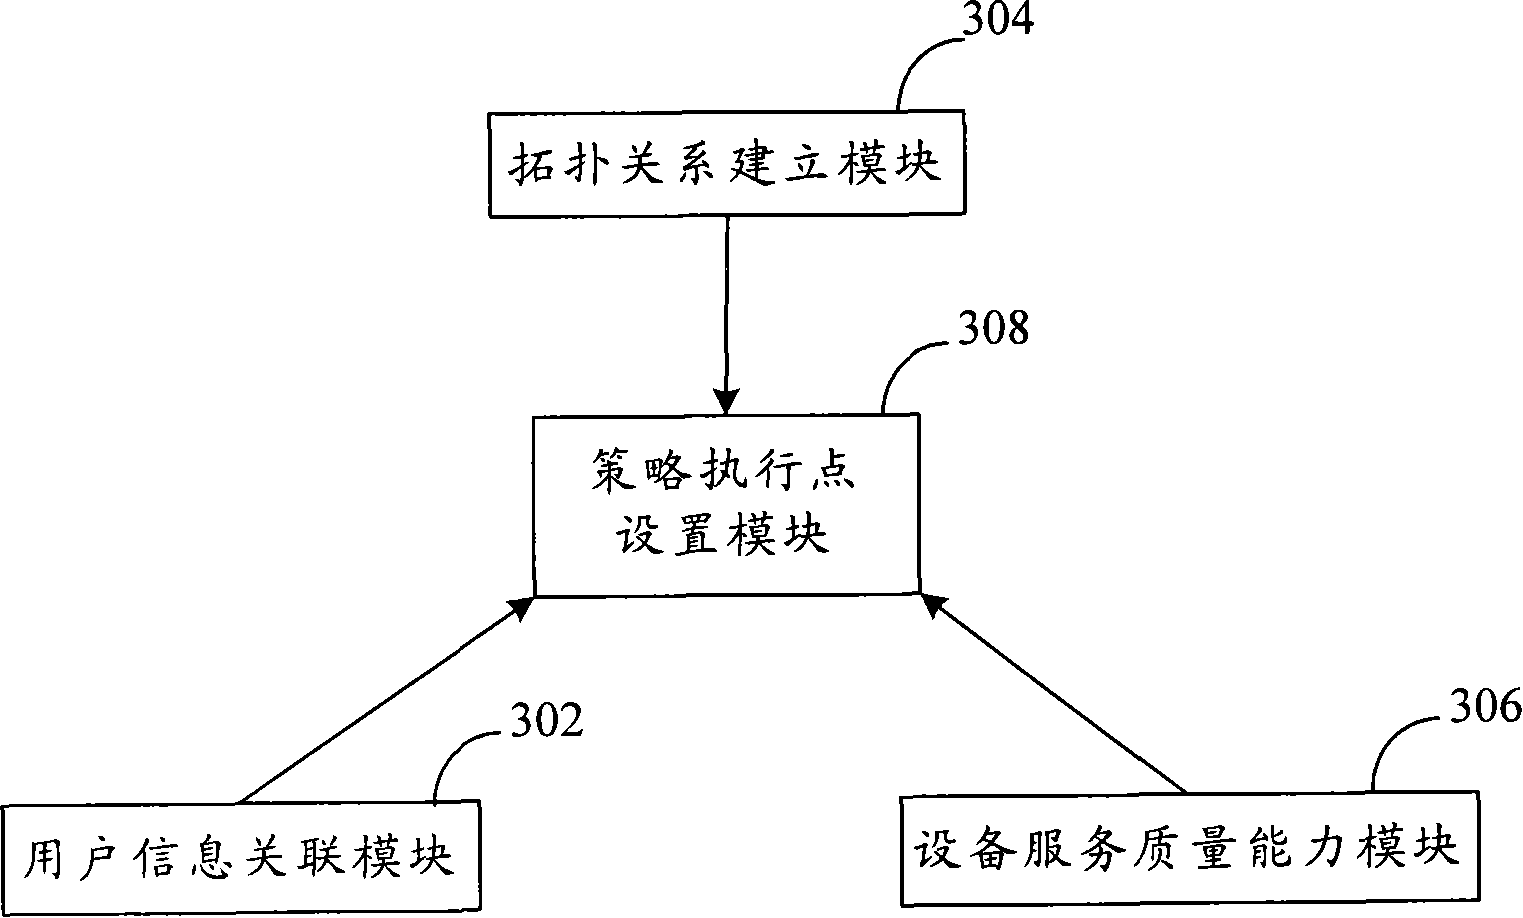 Method and apparatus for choosing policy executing point